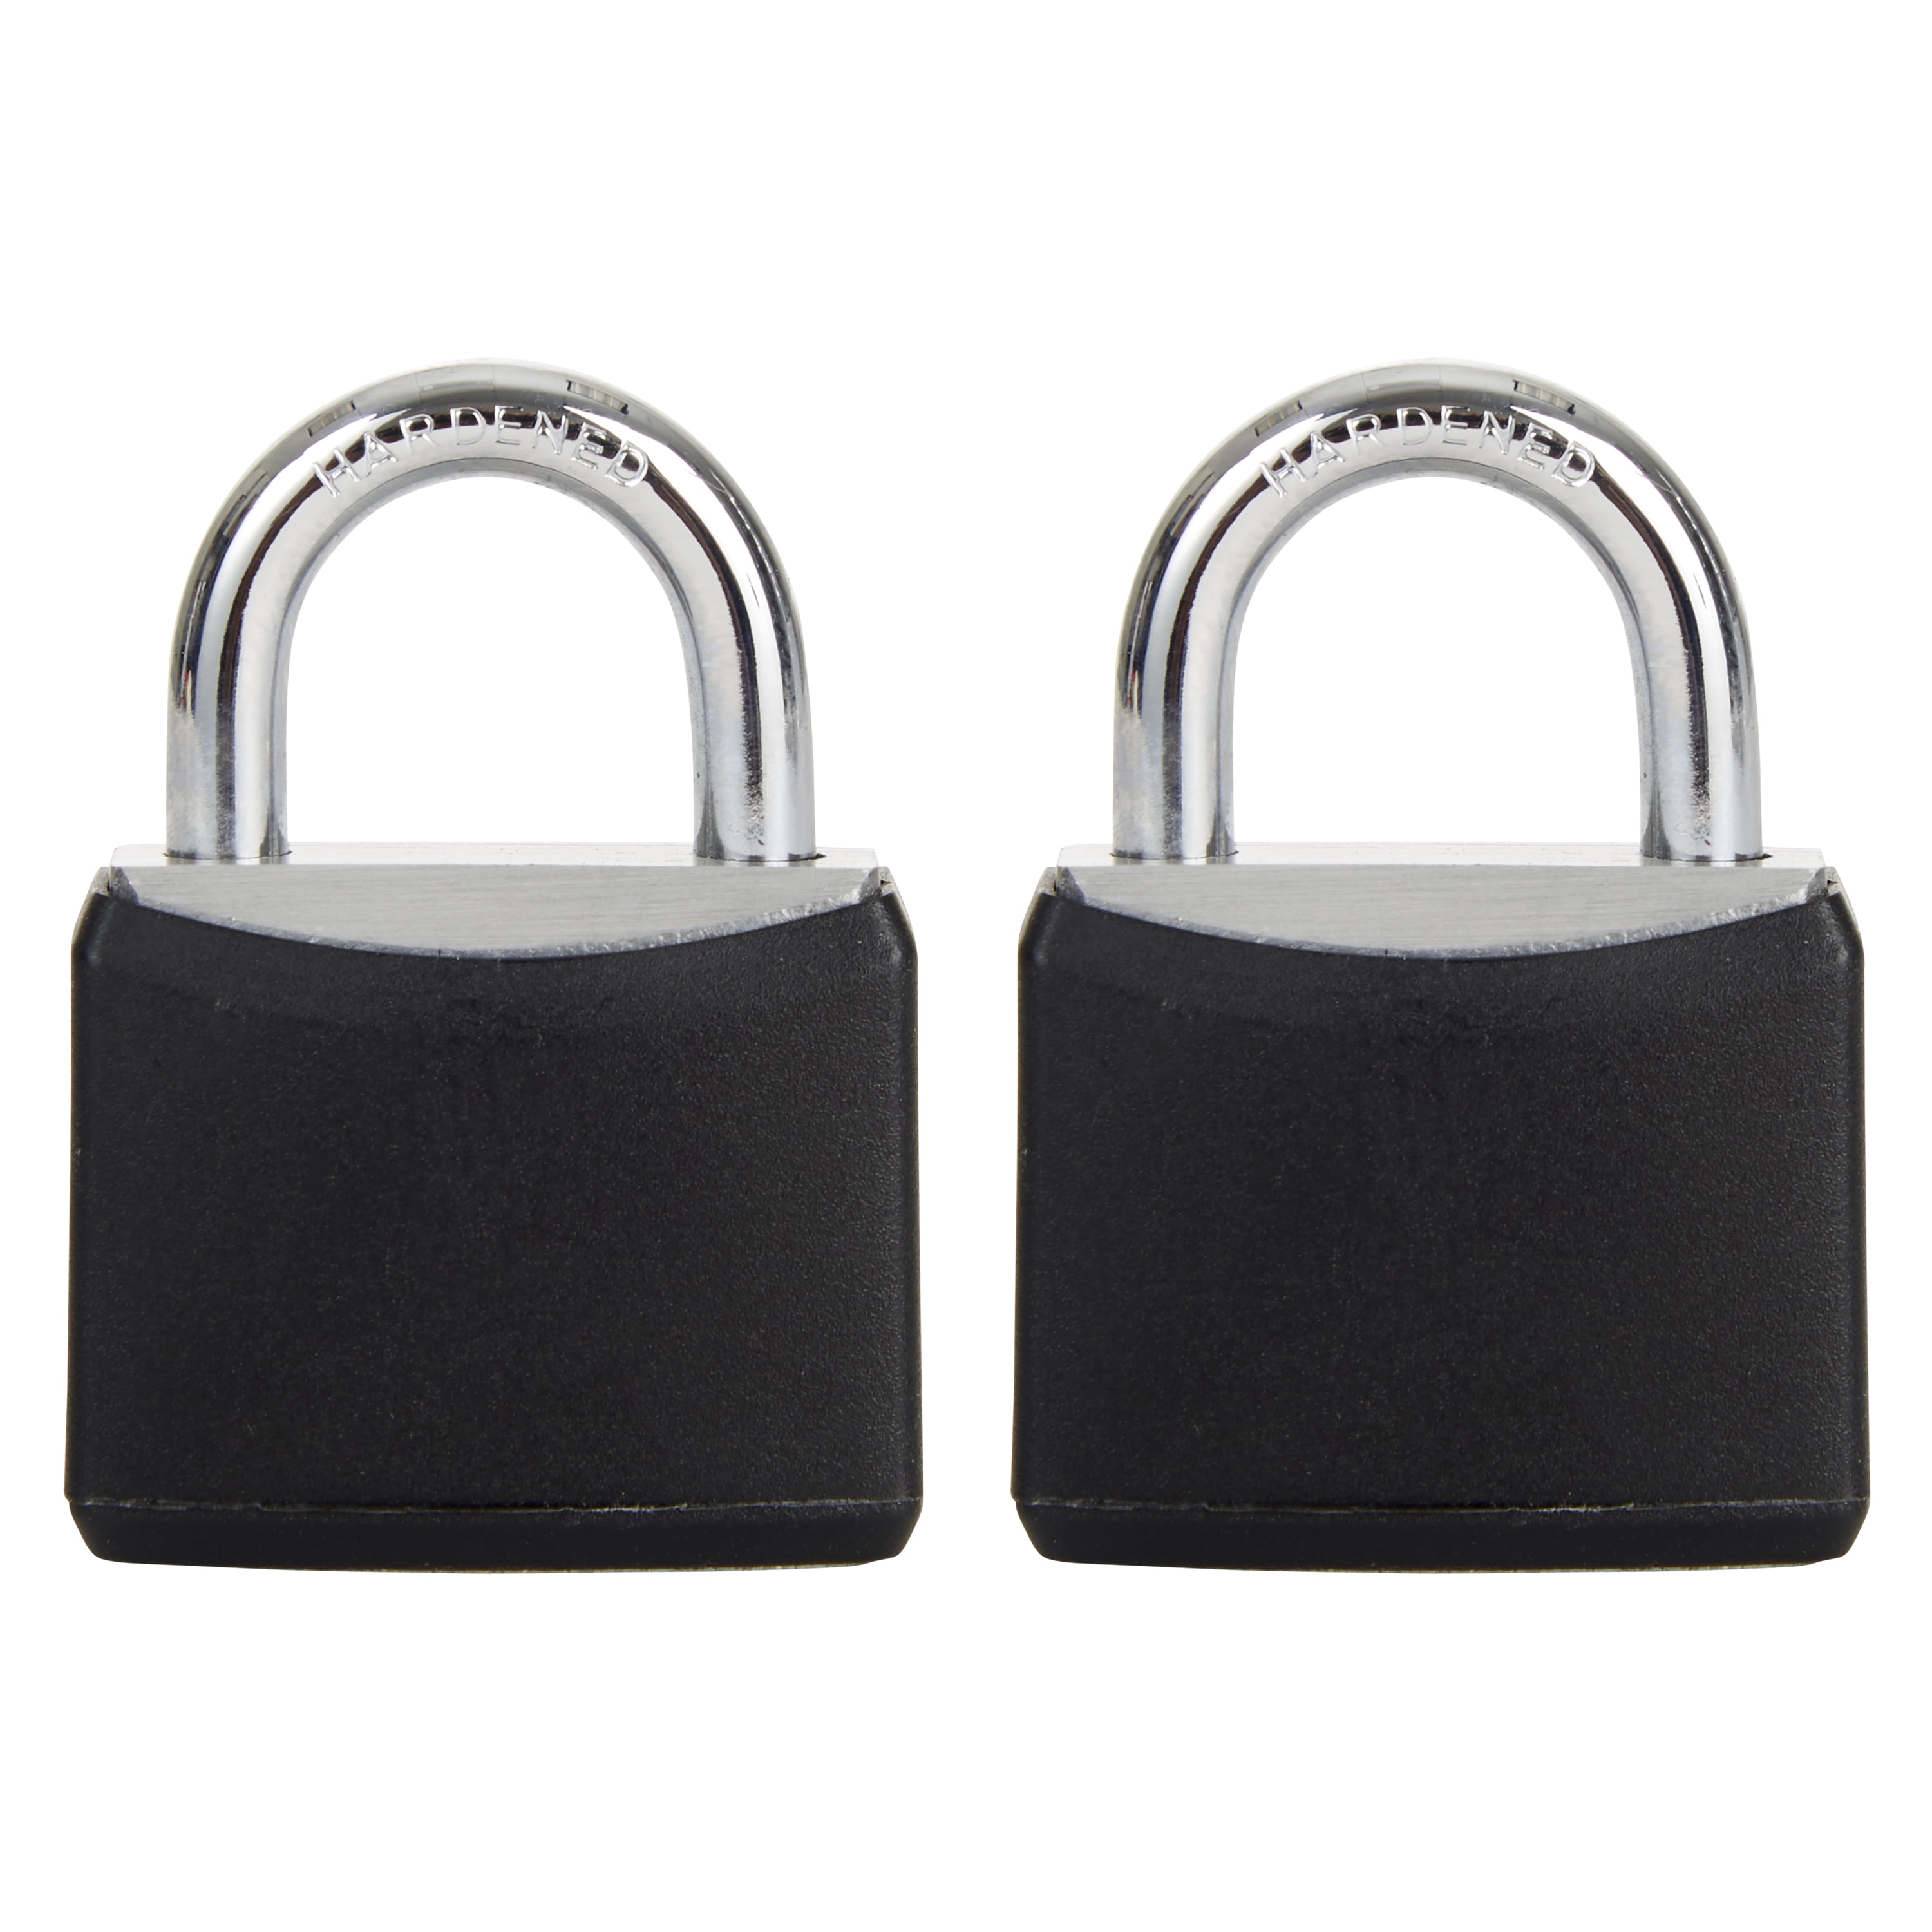 Hyper Tough 30mm Vinyl Covered Aluminum Padlock with 1/2 in. Shackle, 2 Pack